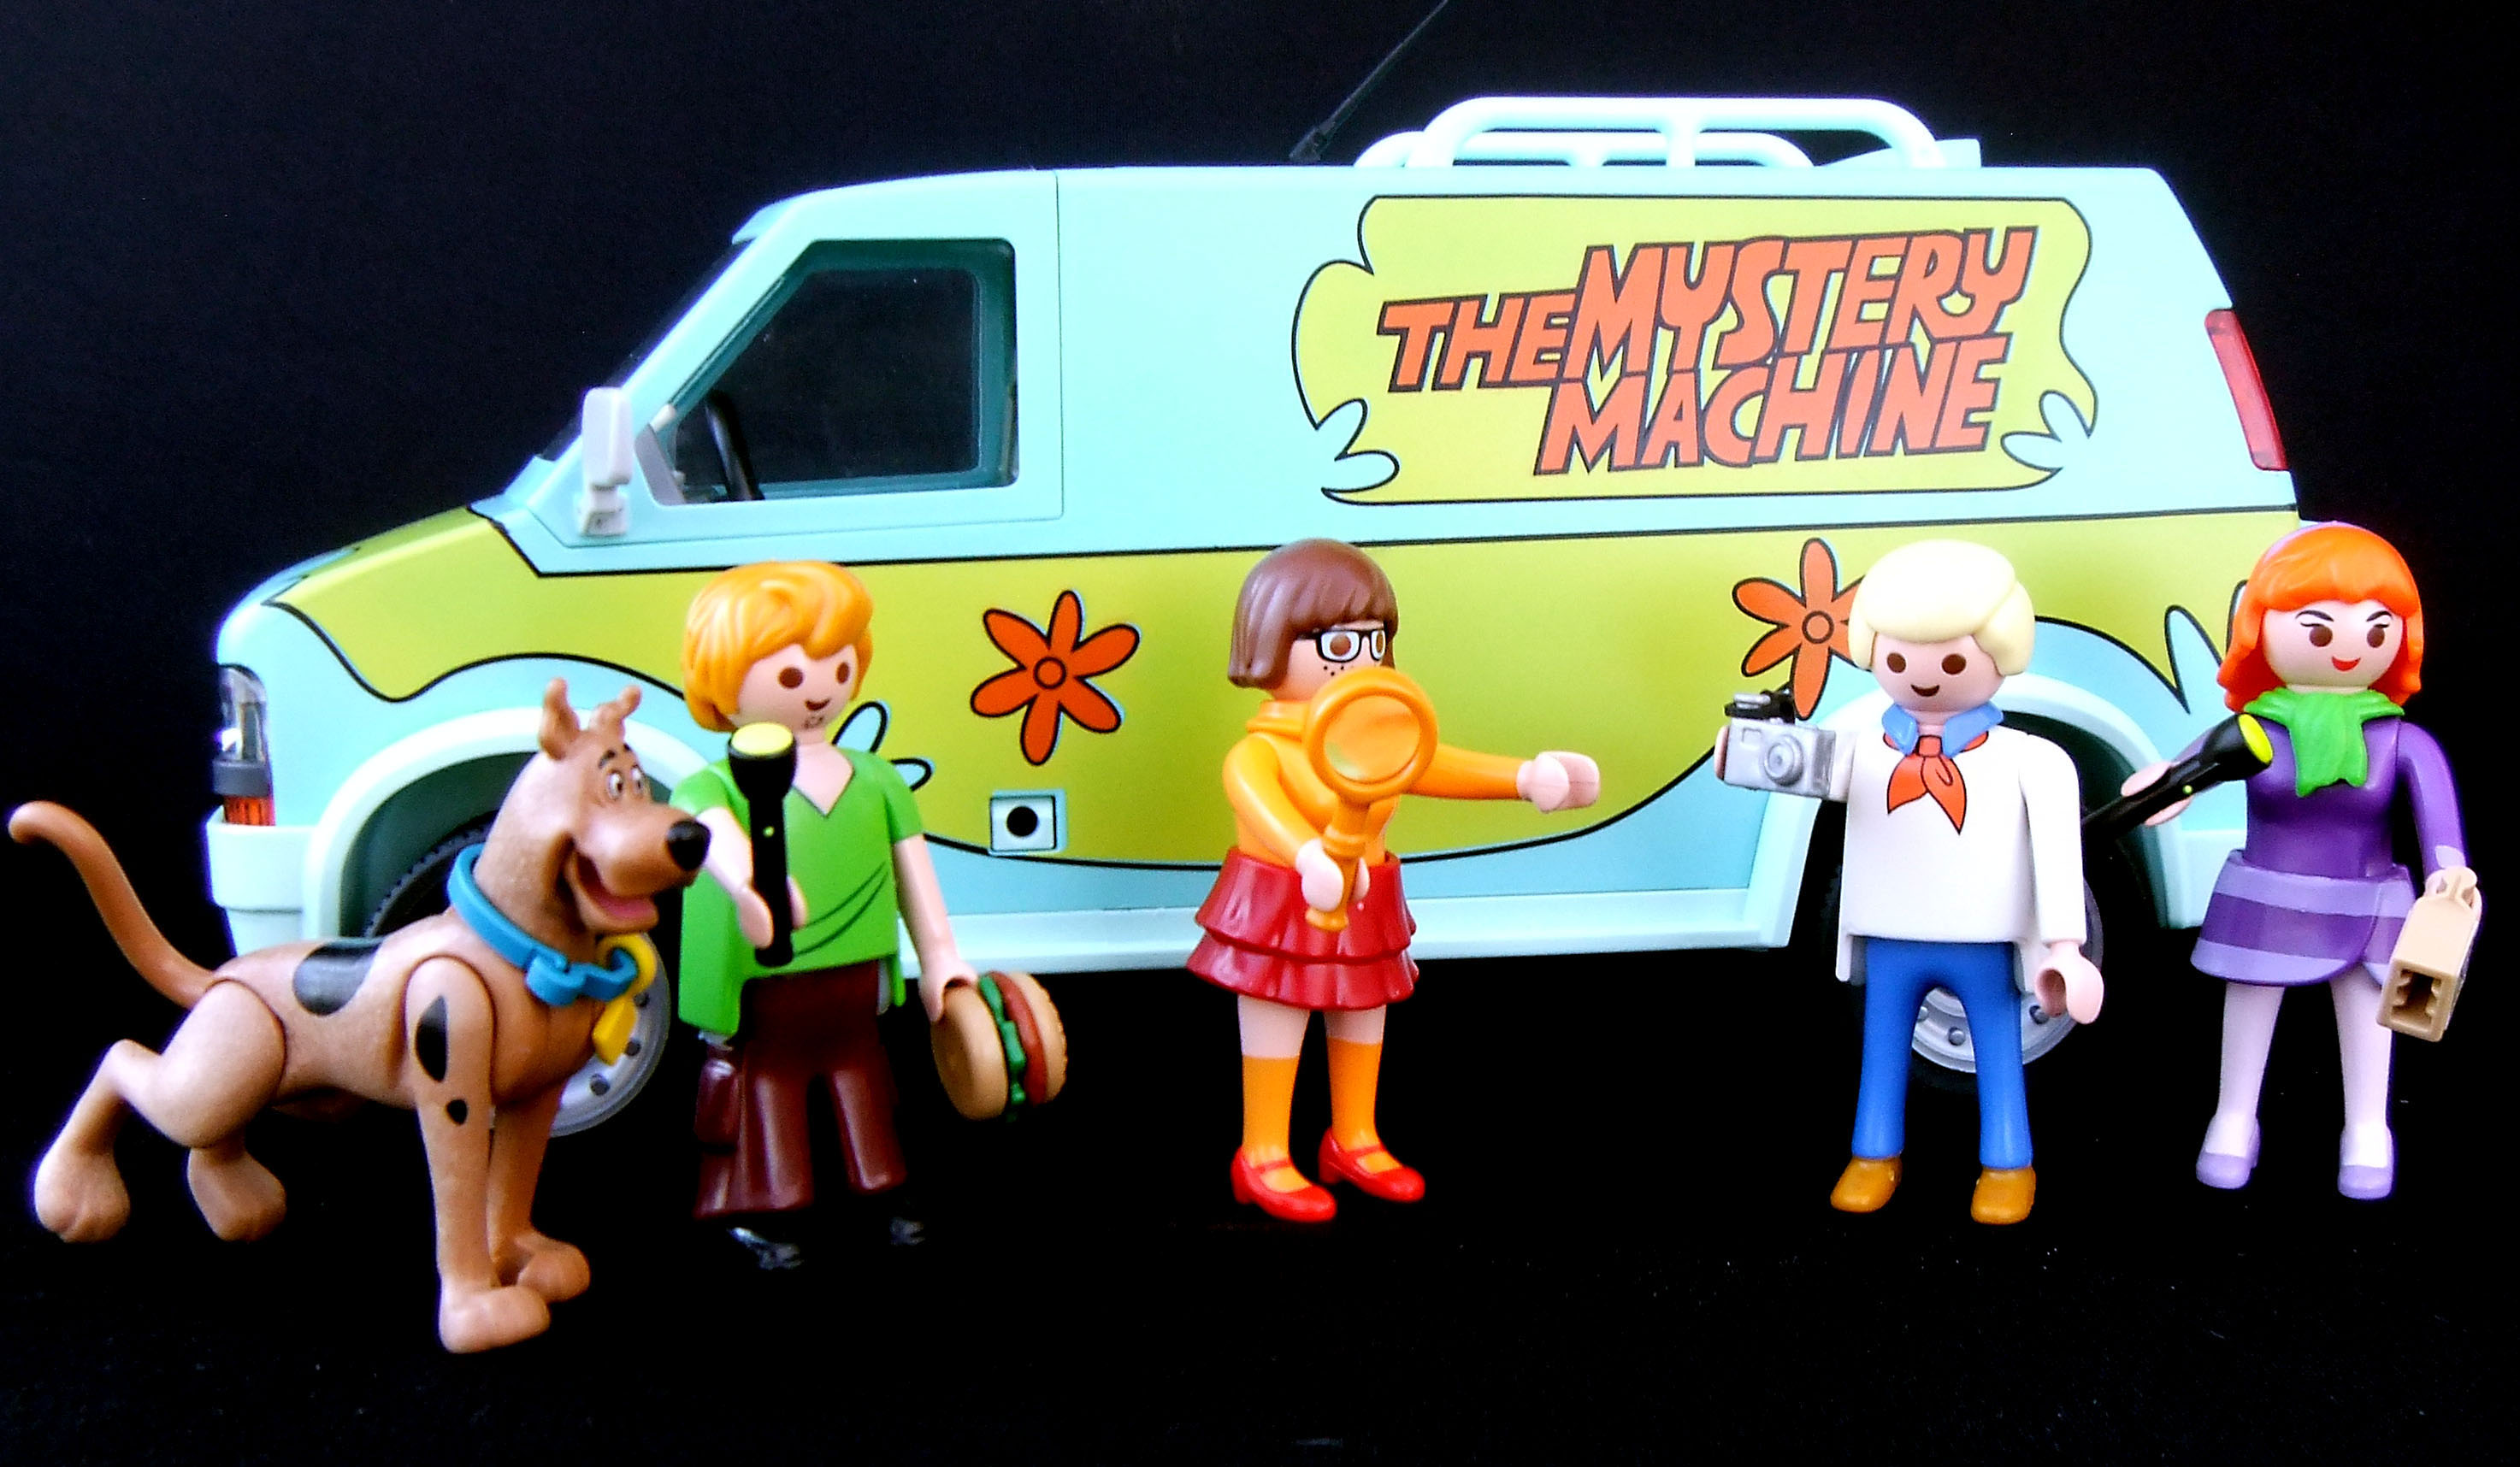 Playmobil Mystery Figures Scooby Doo Ghosts Series 1 The Caretaker 